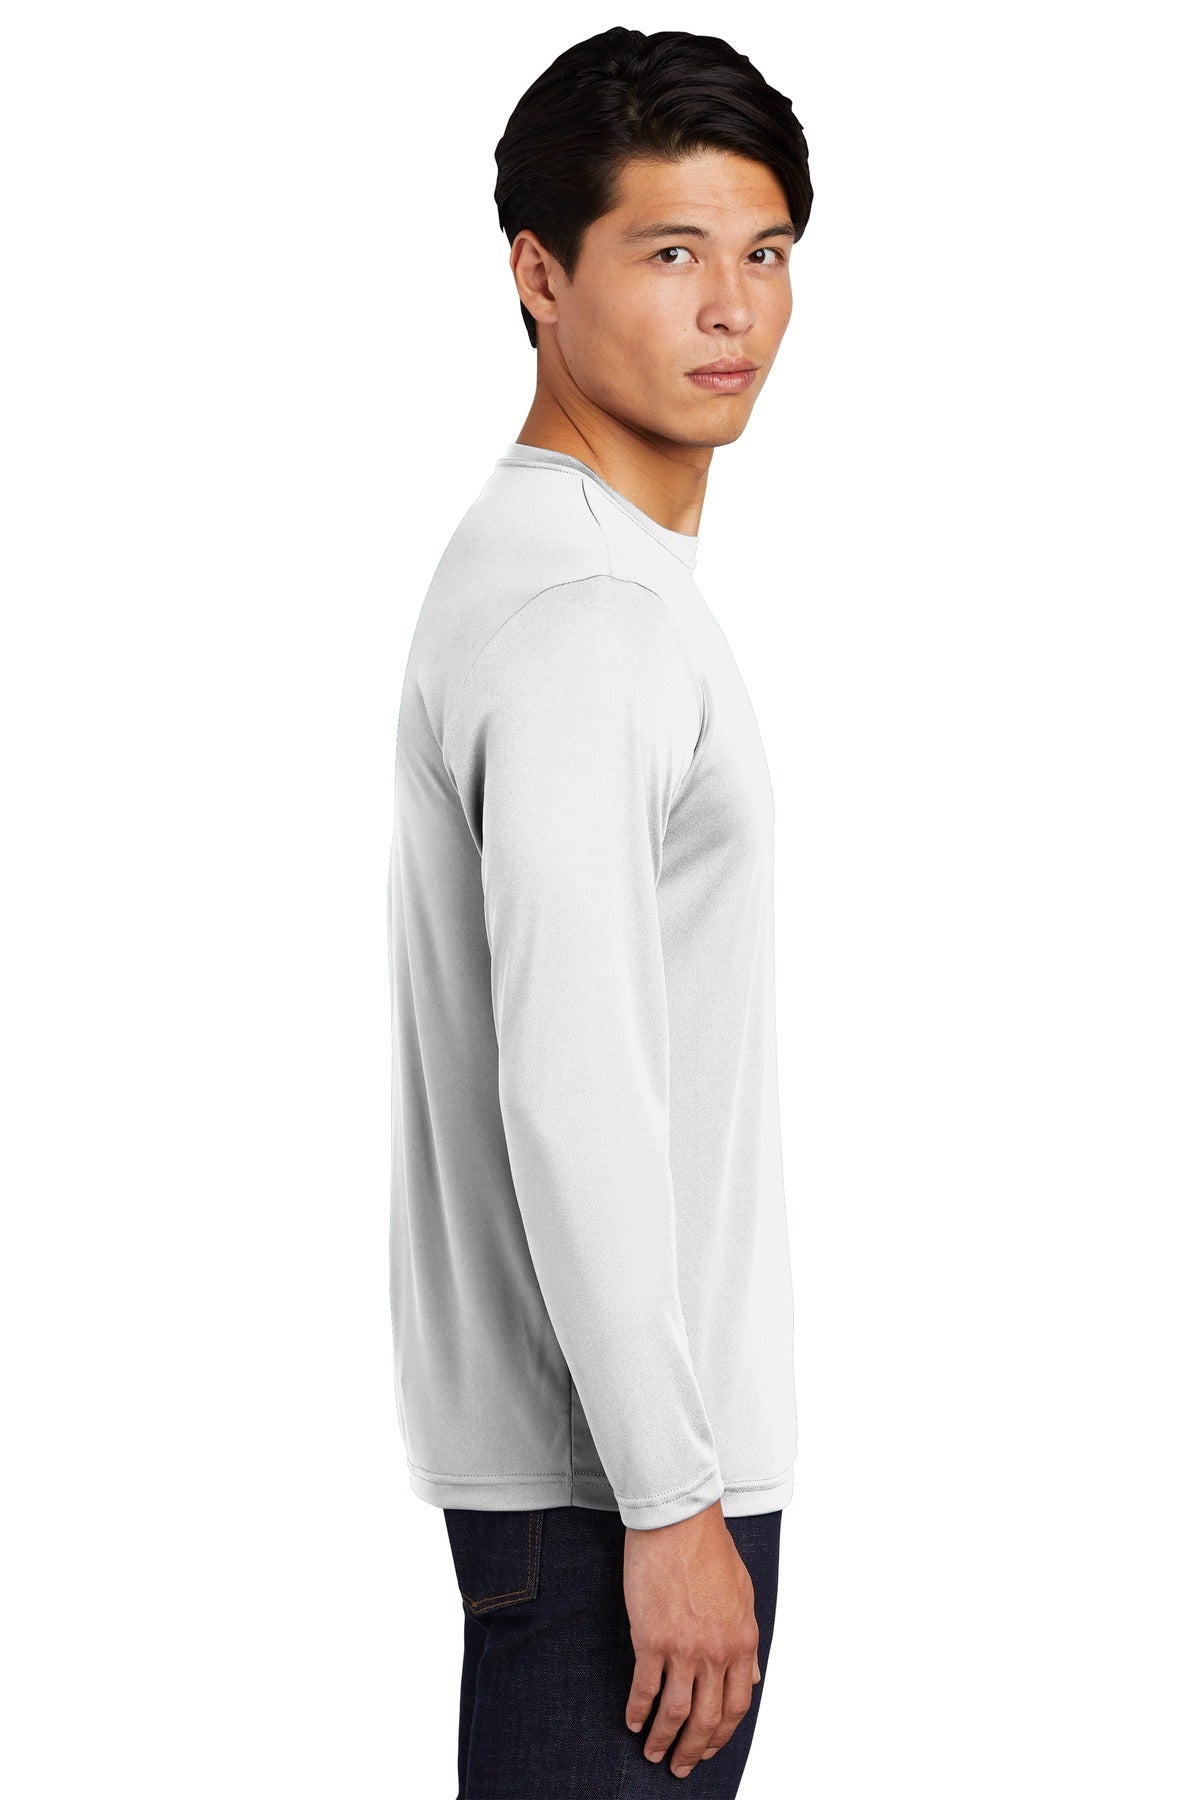 Sport-Tek® Long Sleeve PosiCharge® Competitor™ Tee. ST350LS [White] - DFW Impression